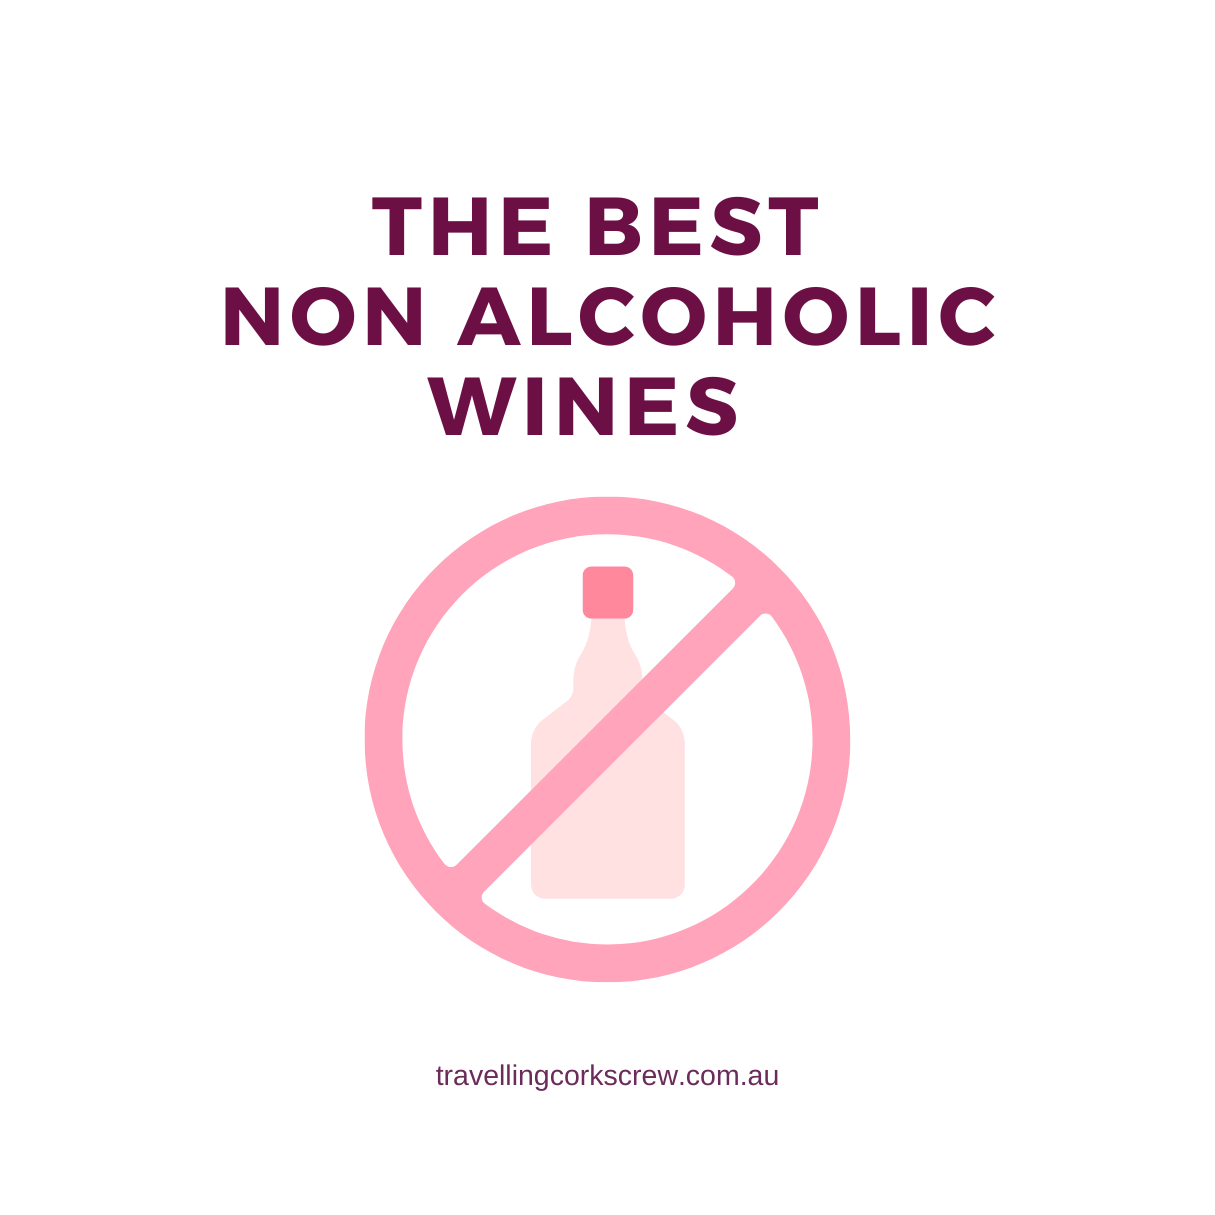 27 Best Non Alcoholic Wines in Australia That Taste Decent (All tasted by me!)